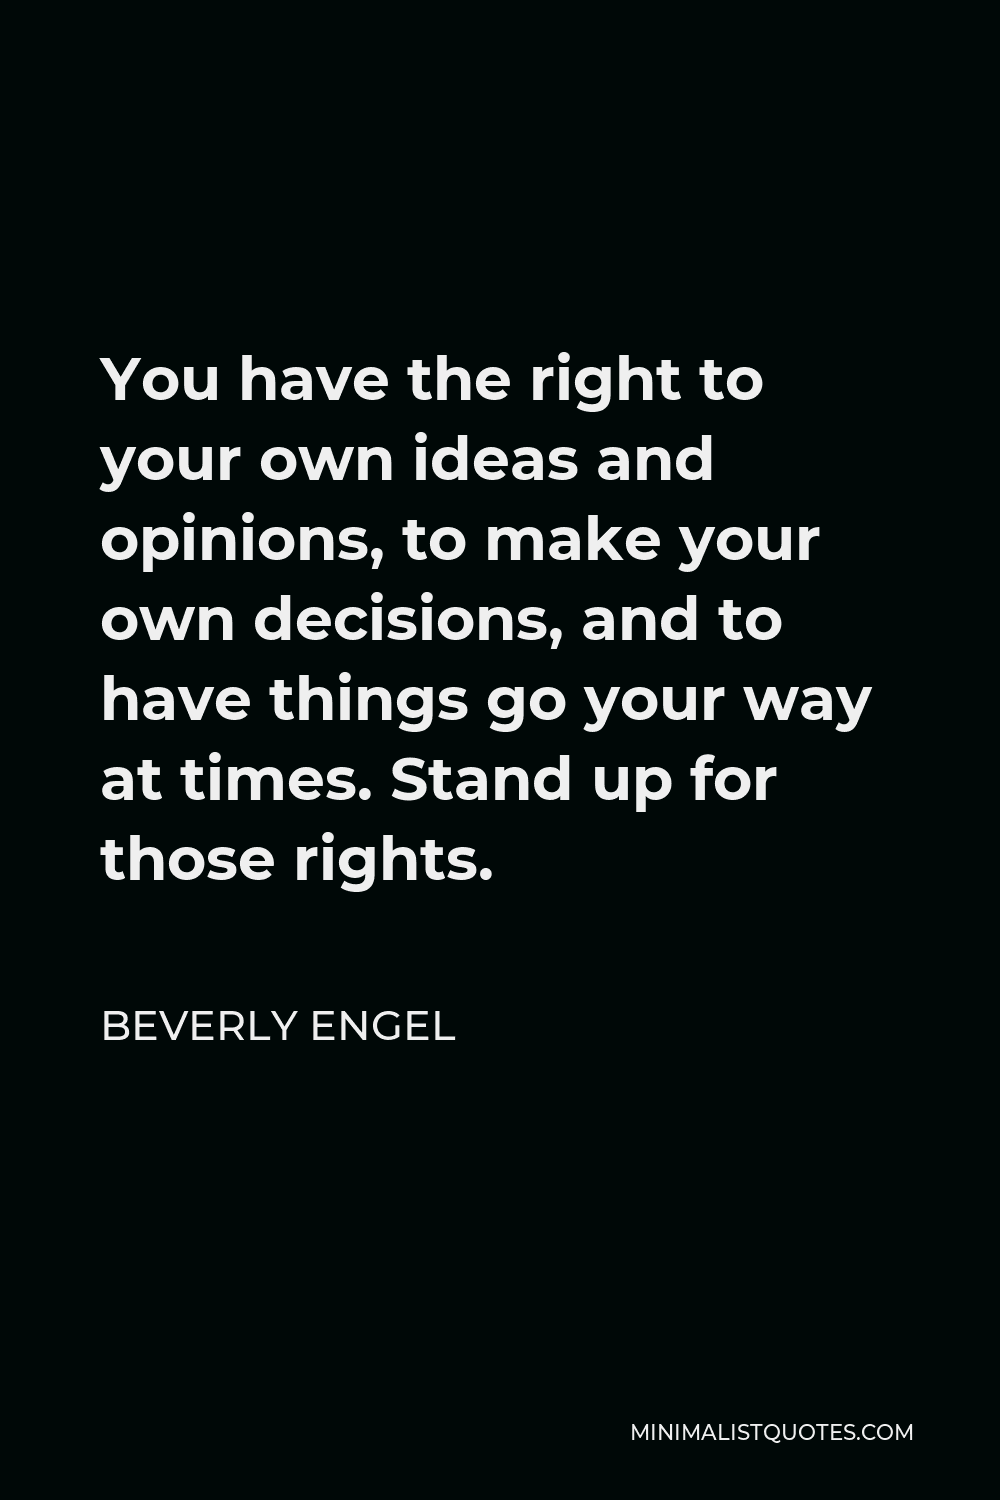 Beverly Engel Quote - You have the right to your own ideas and opinions, to make your own decisions, and to have things go your way at times. Stand up for those rights.